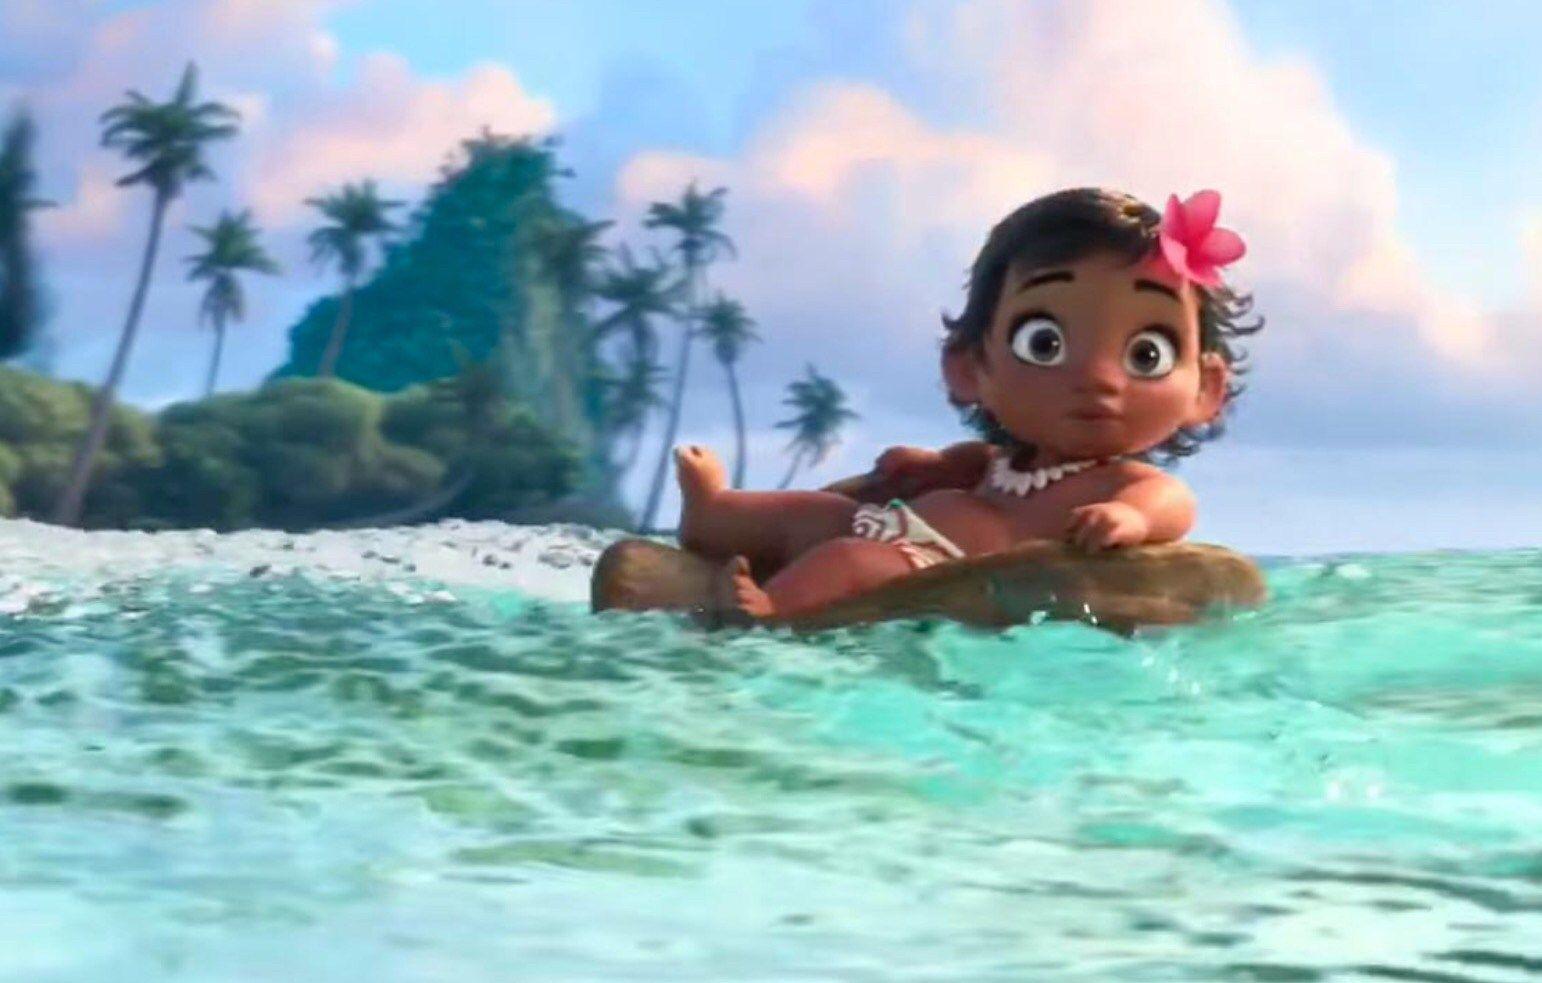 Baby Moana Wallpapers - Top Free Baby